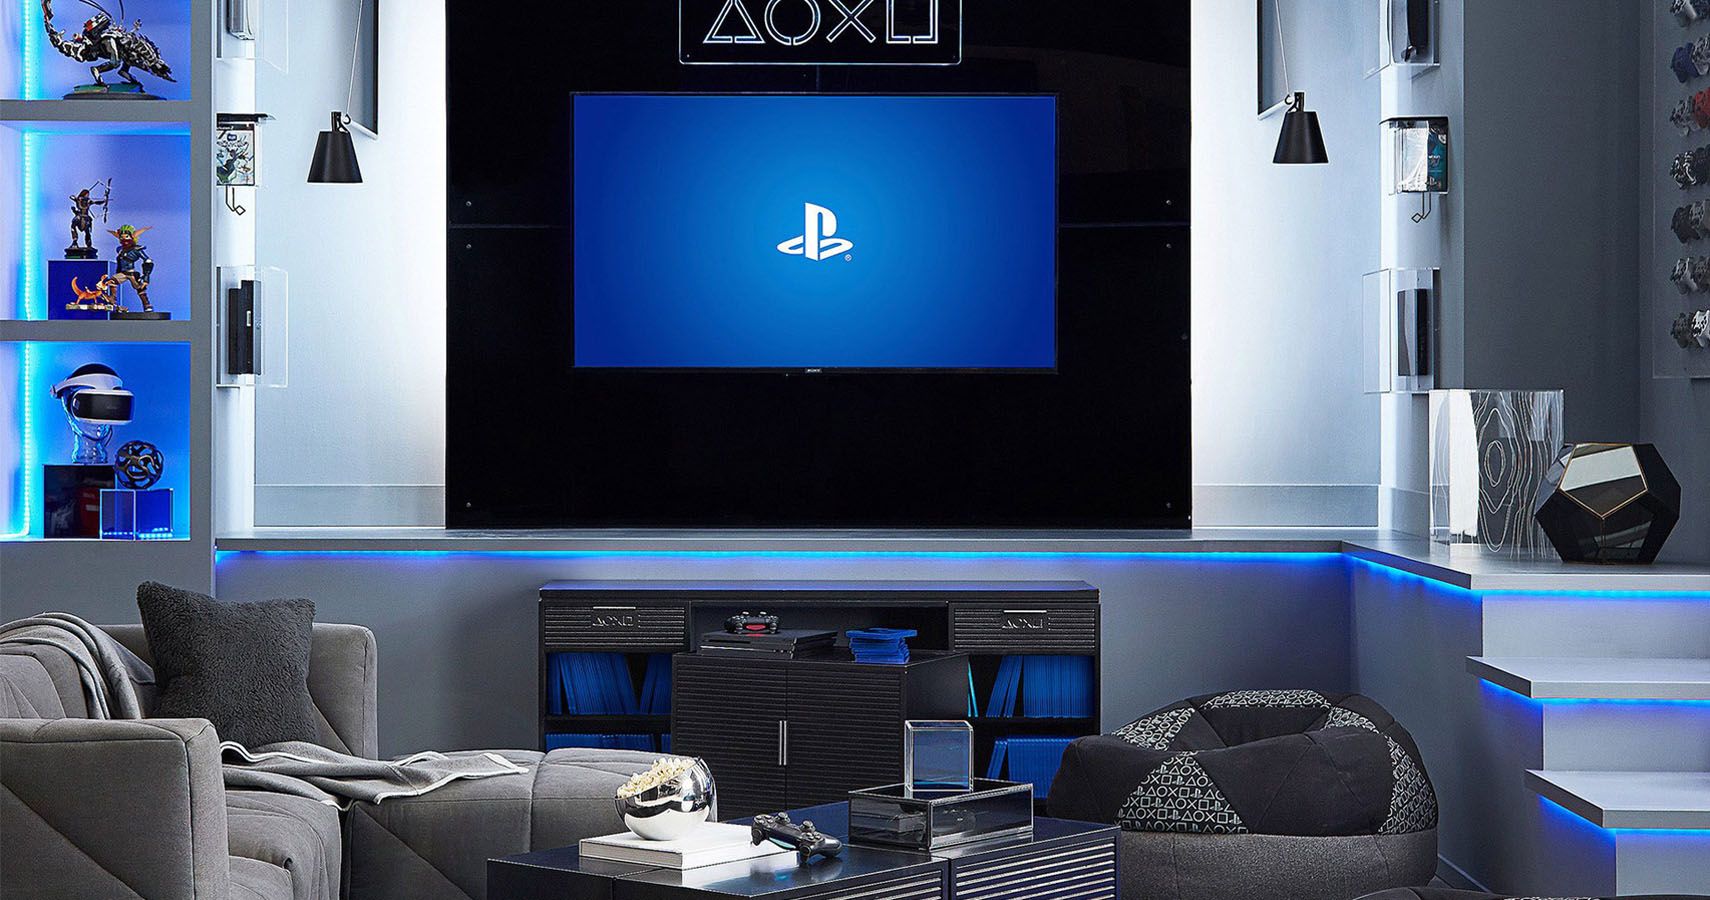 This Official PlayStationBranded Furniture Is Super Neat And Perfect To Match Your Console